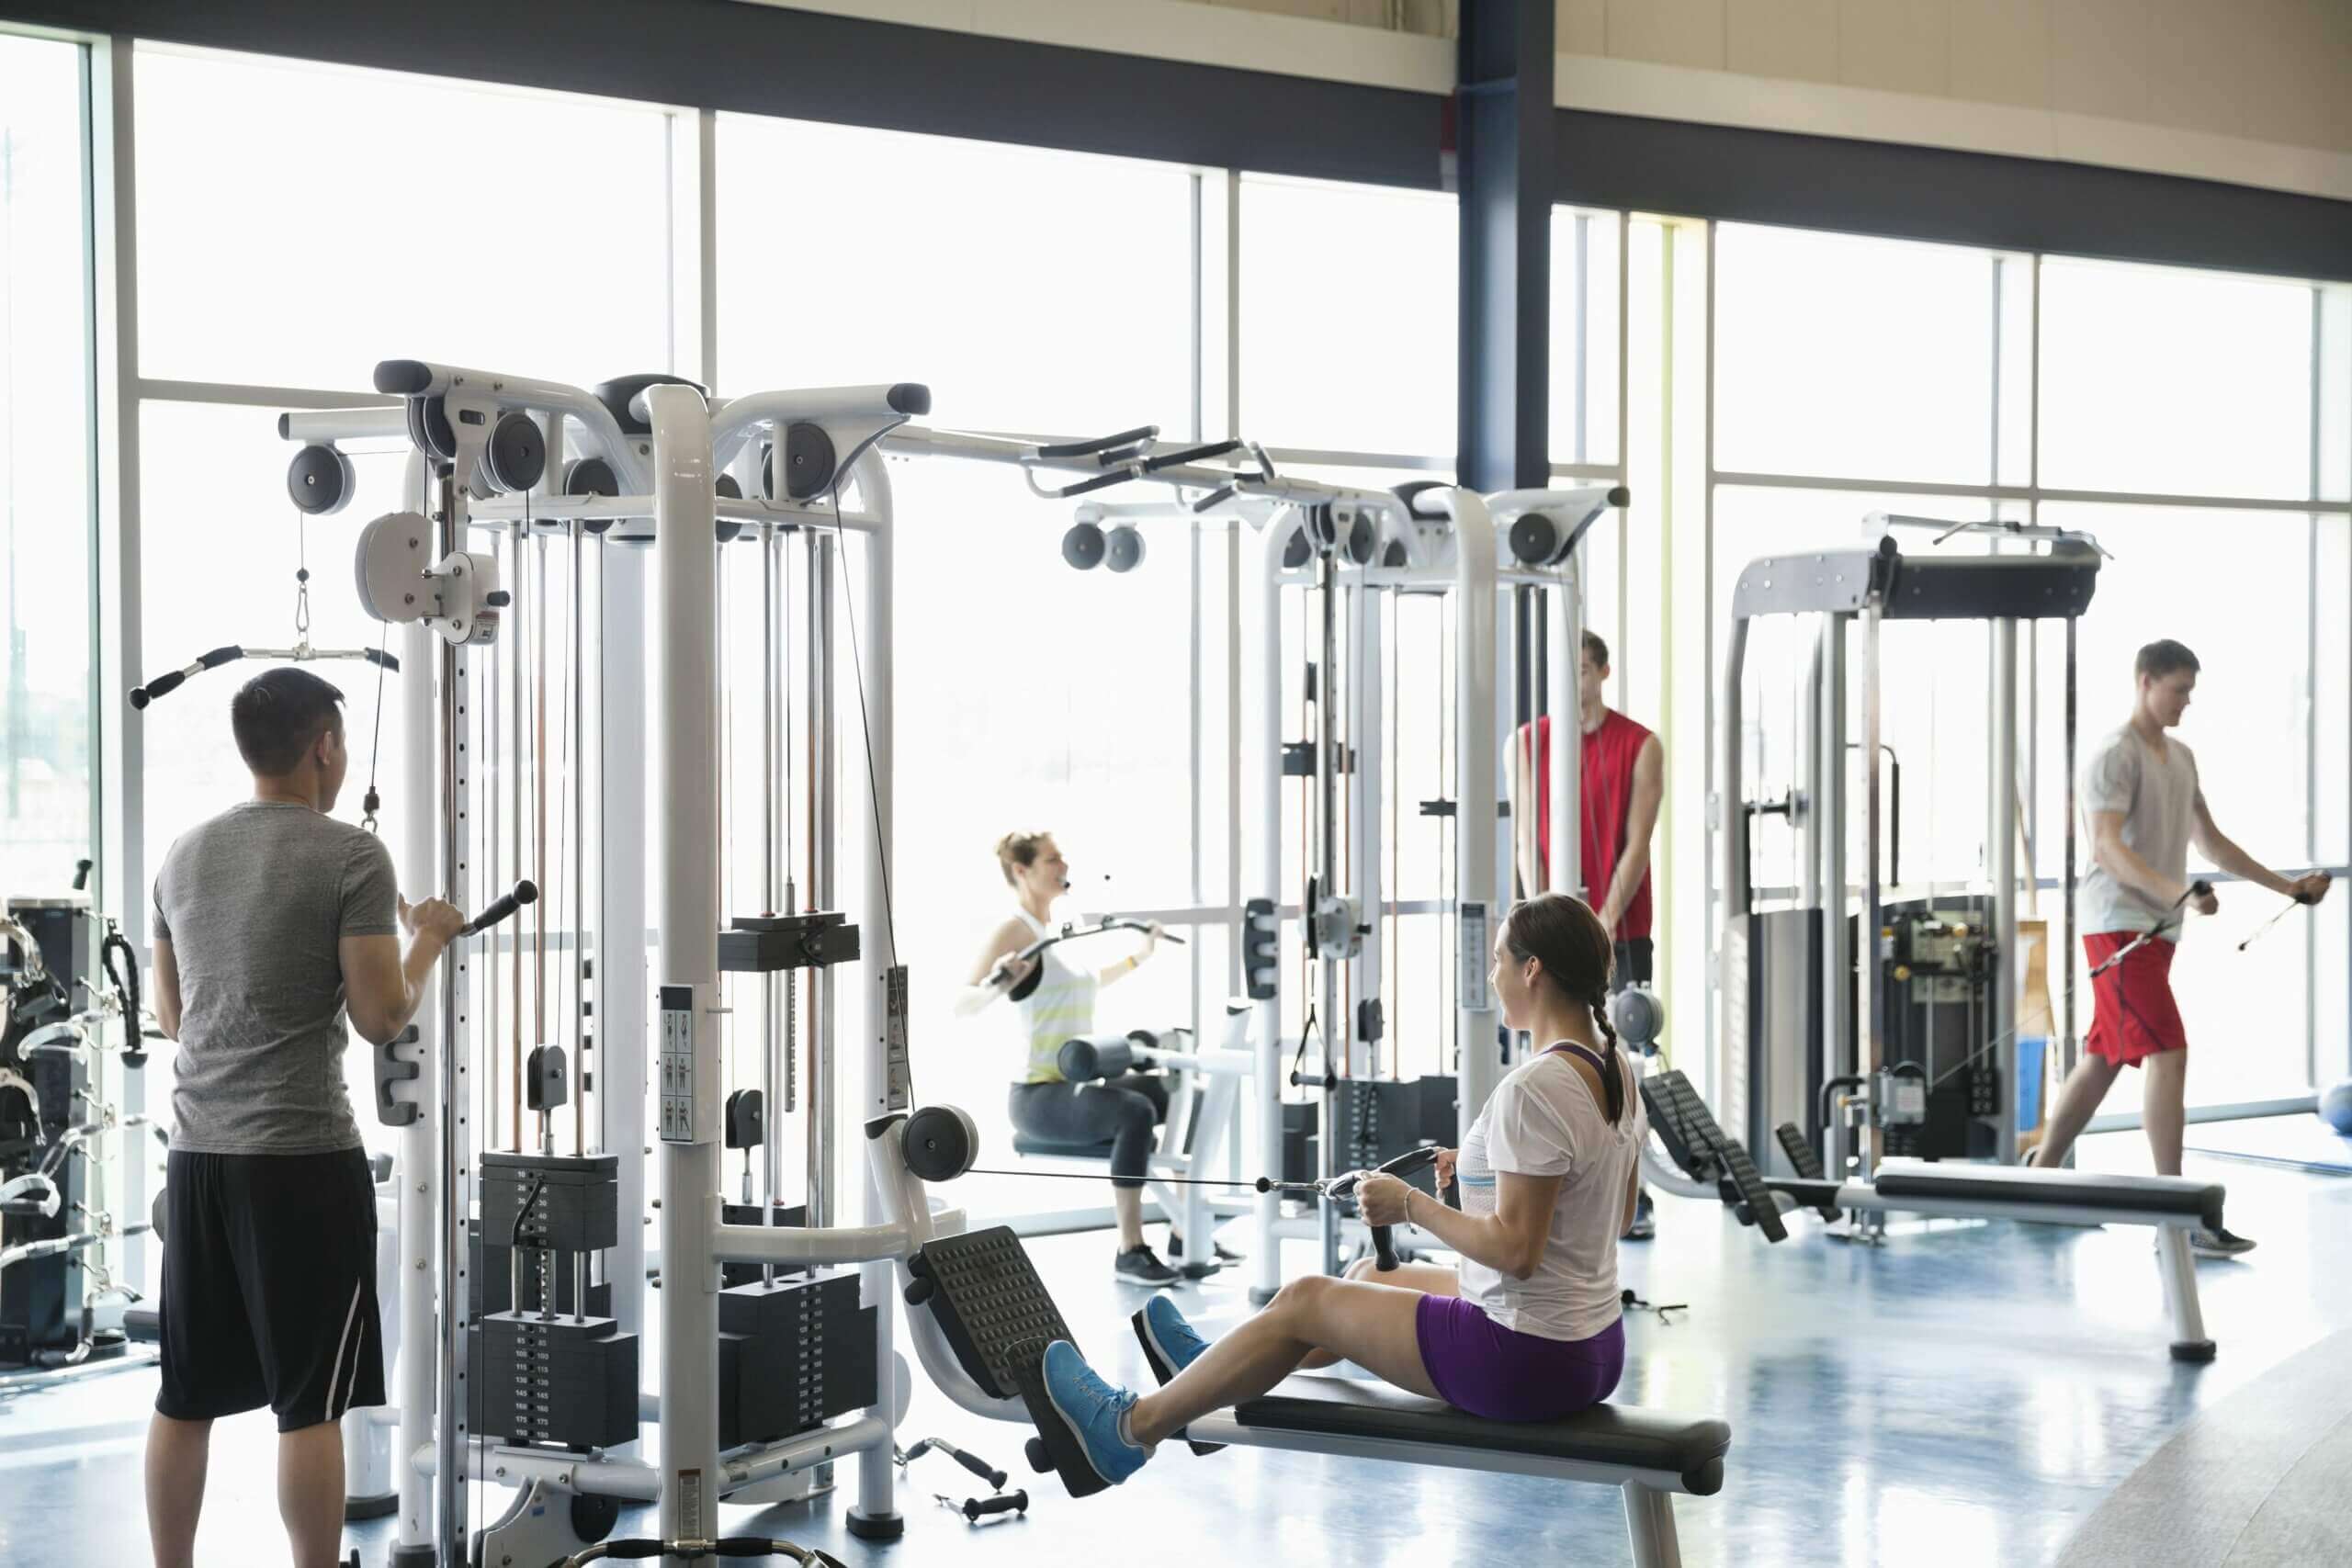 HOW TO OPEN A GYM or Fitness Center: 5 ESSENTIAL FEATURES A GREAT GYM NEEDS